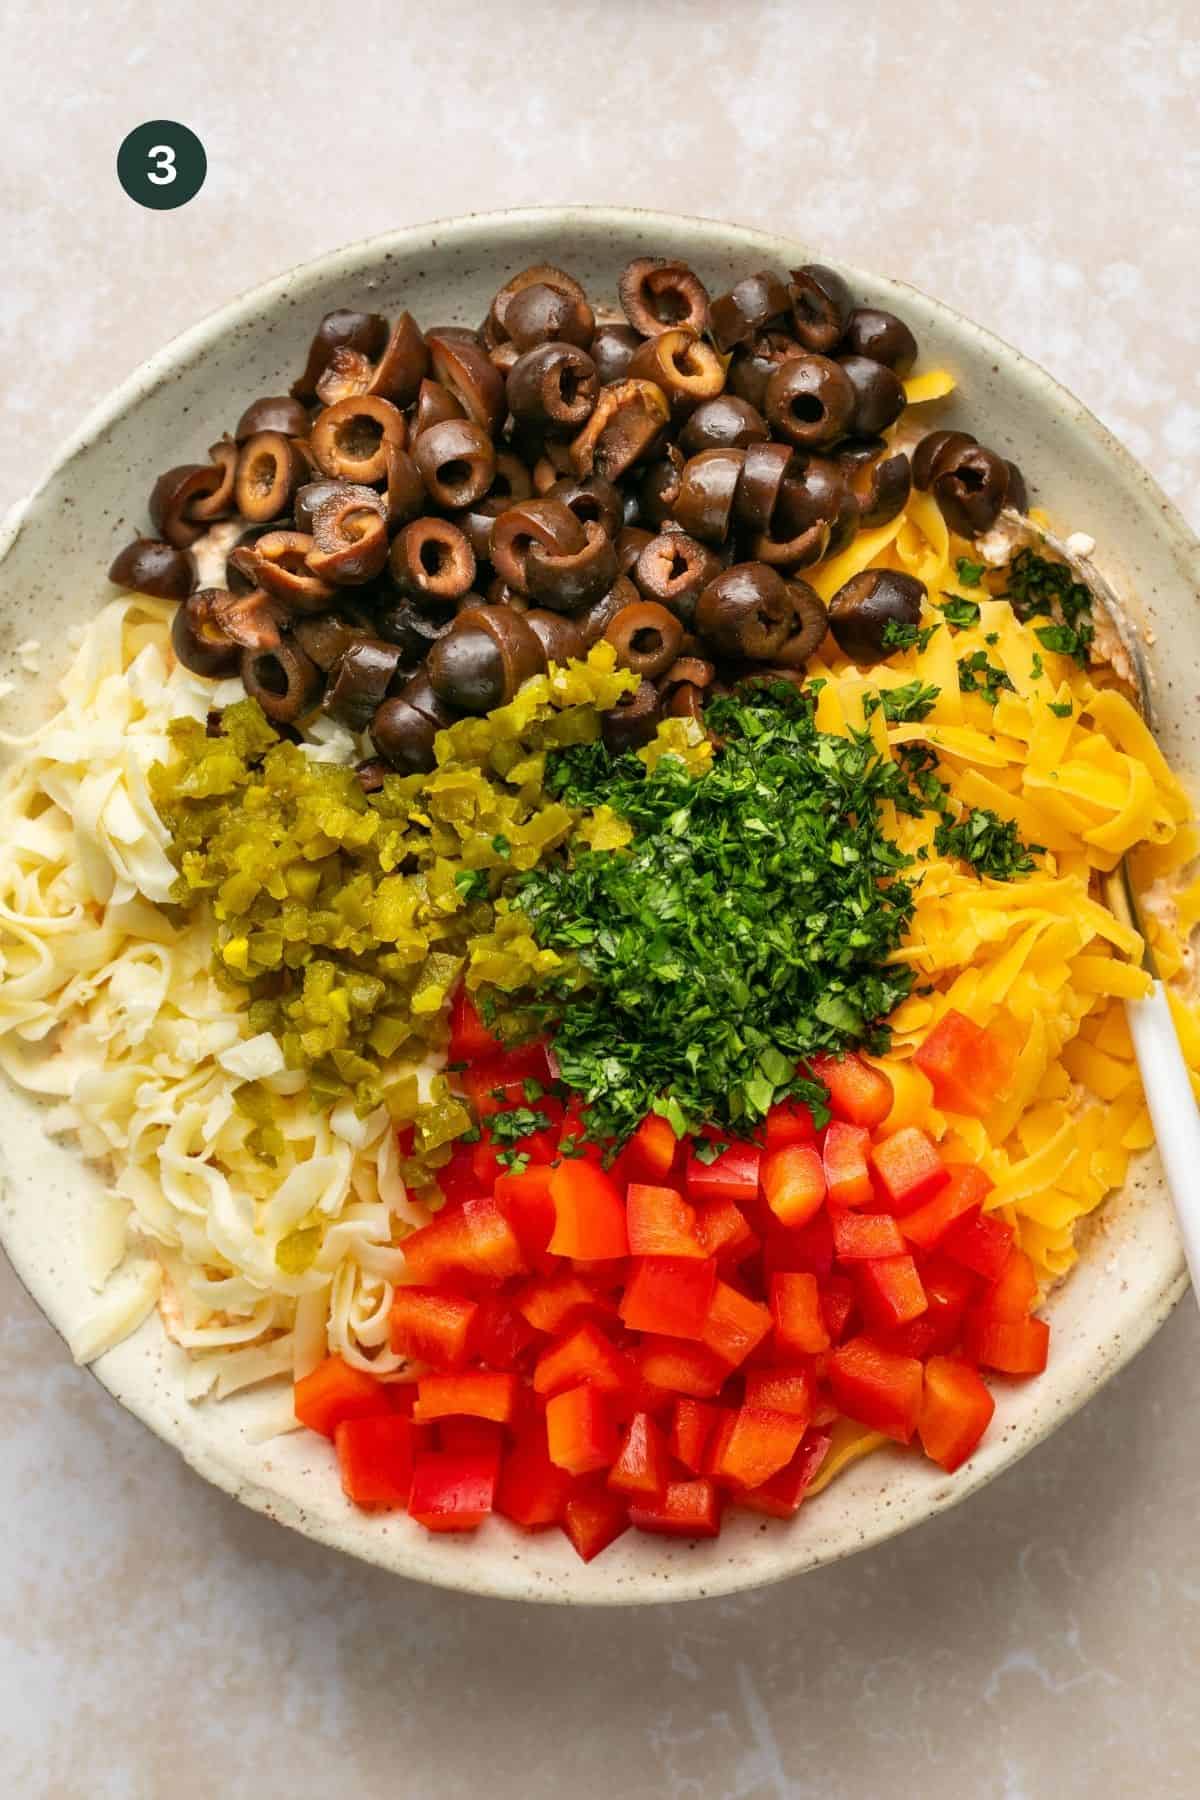 Olives, jalapenos, cheddar cheese, pepper jack cheese, bell peppers and cilantro added to the bowl with the cream cheese to combine. 